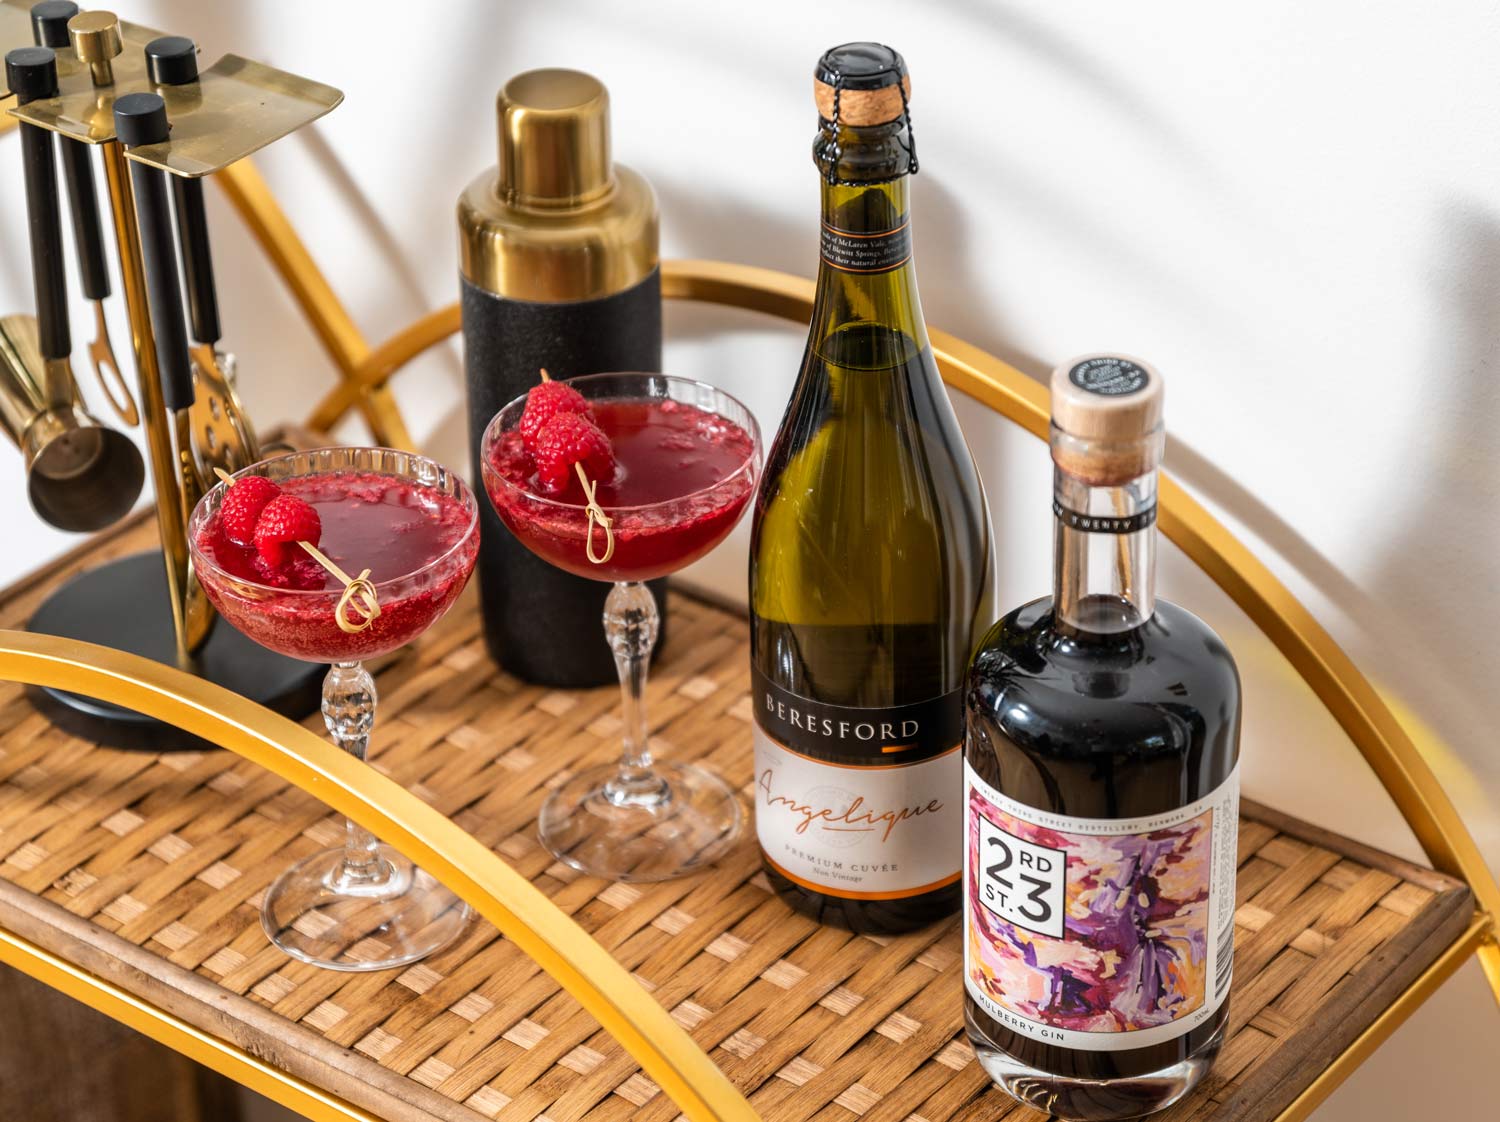 red cocktails on a bar cart with 23rd street mulberry gin bottle